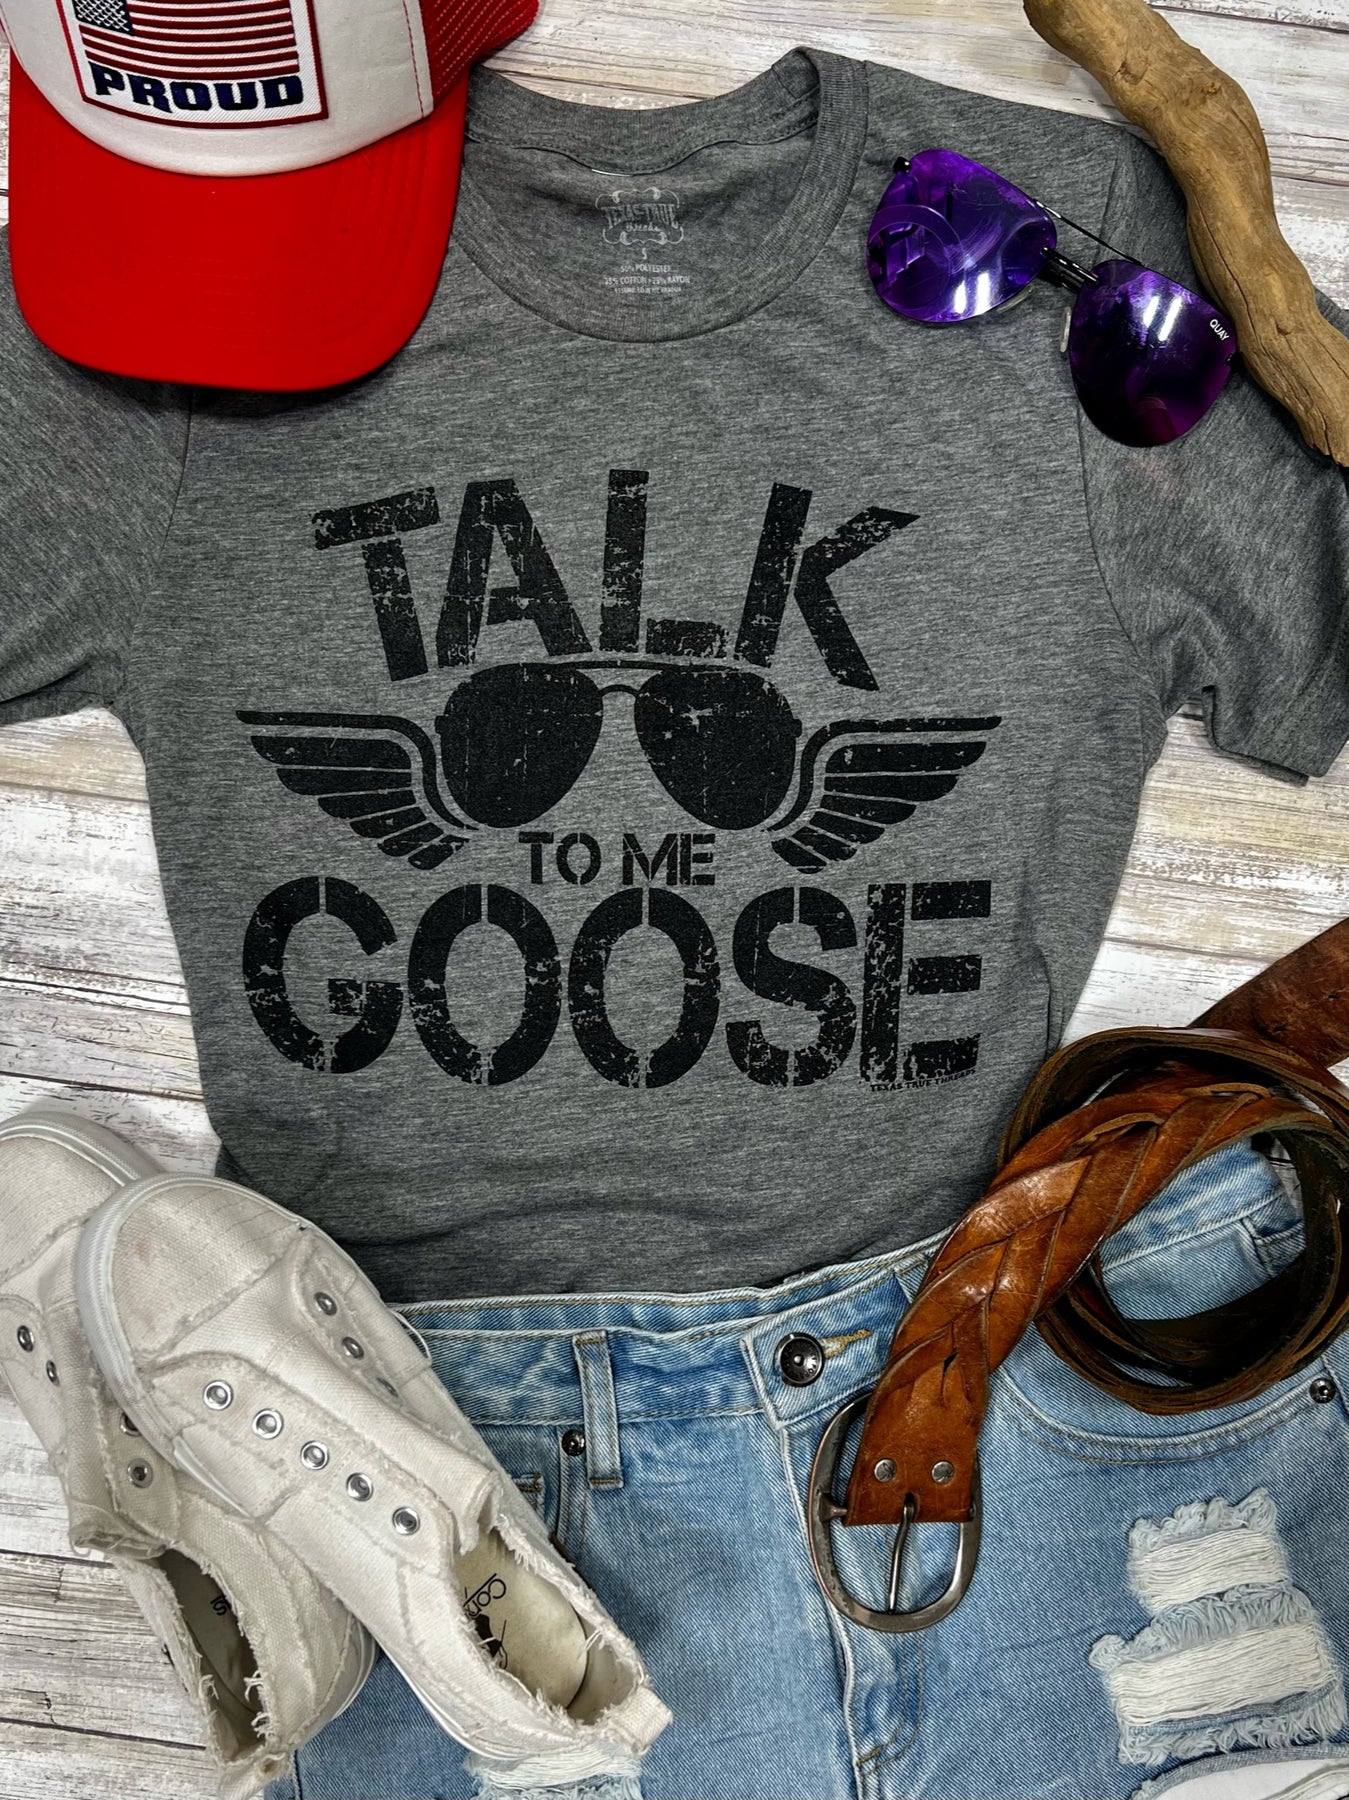 Birdawg Boutique Talk to Me Goose T-Shirt 2XL / Oatmeal Triblend Tee